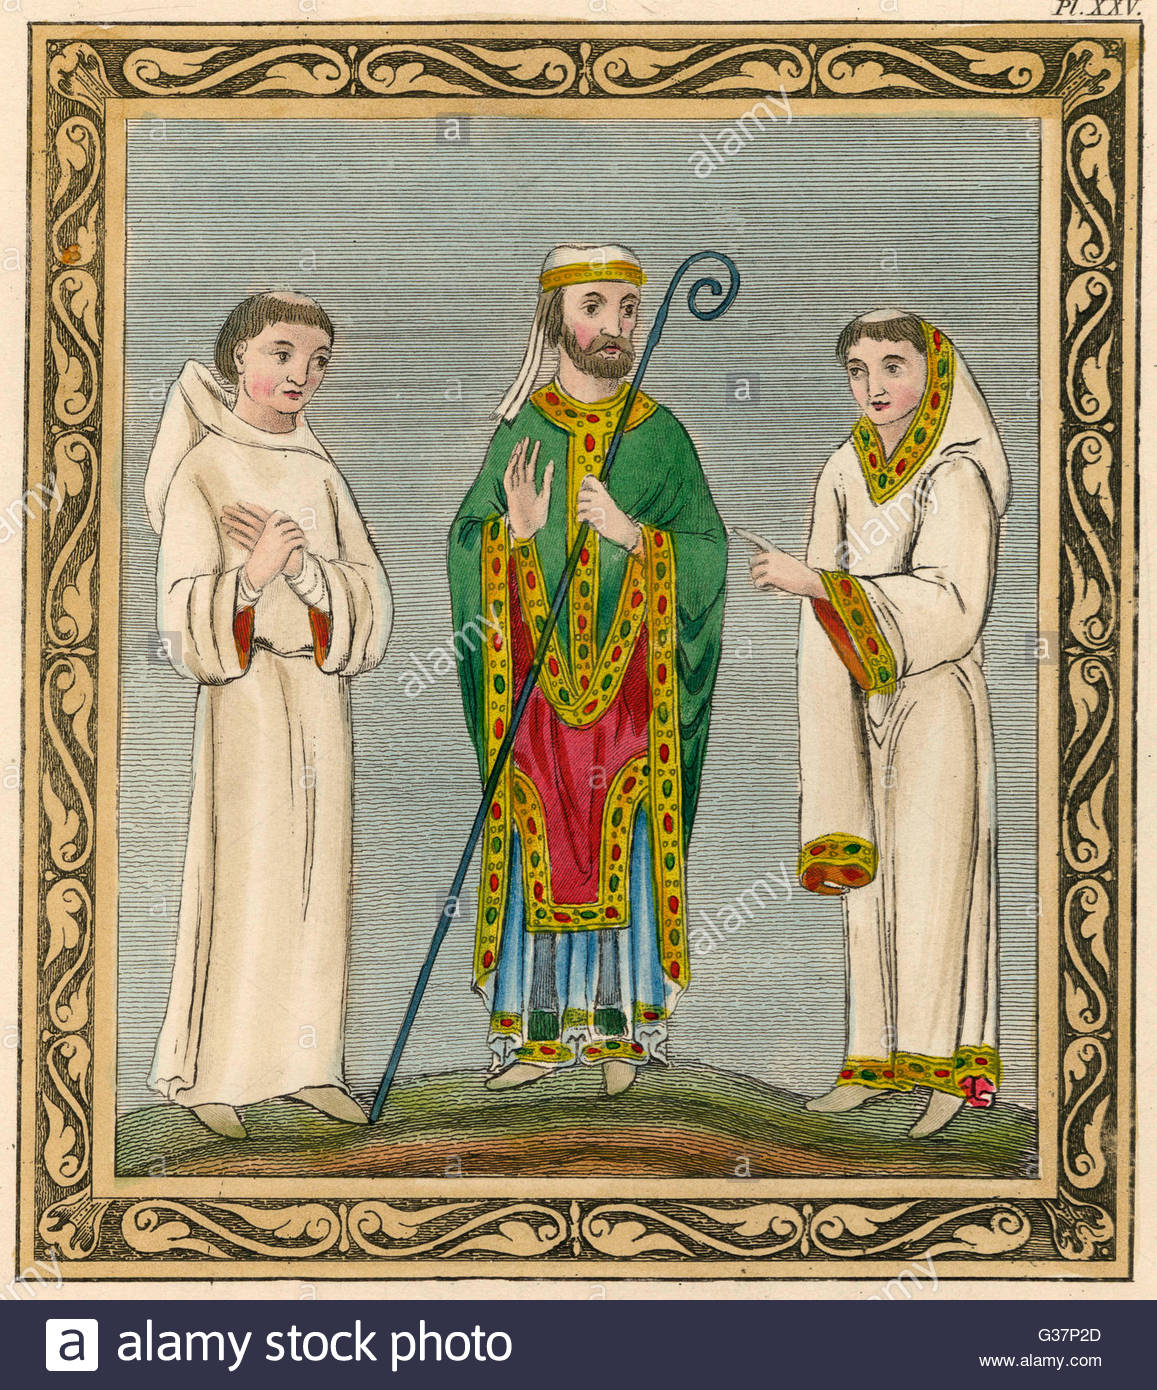 Ecclesiastics in their traditional garb. Date: 10 - 11th century